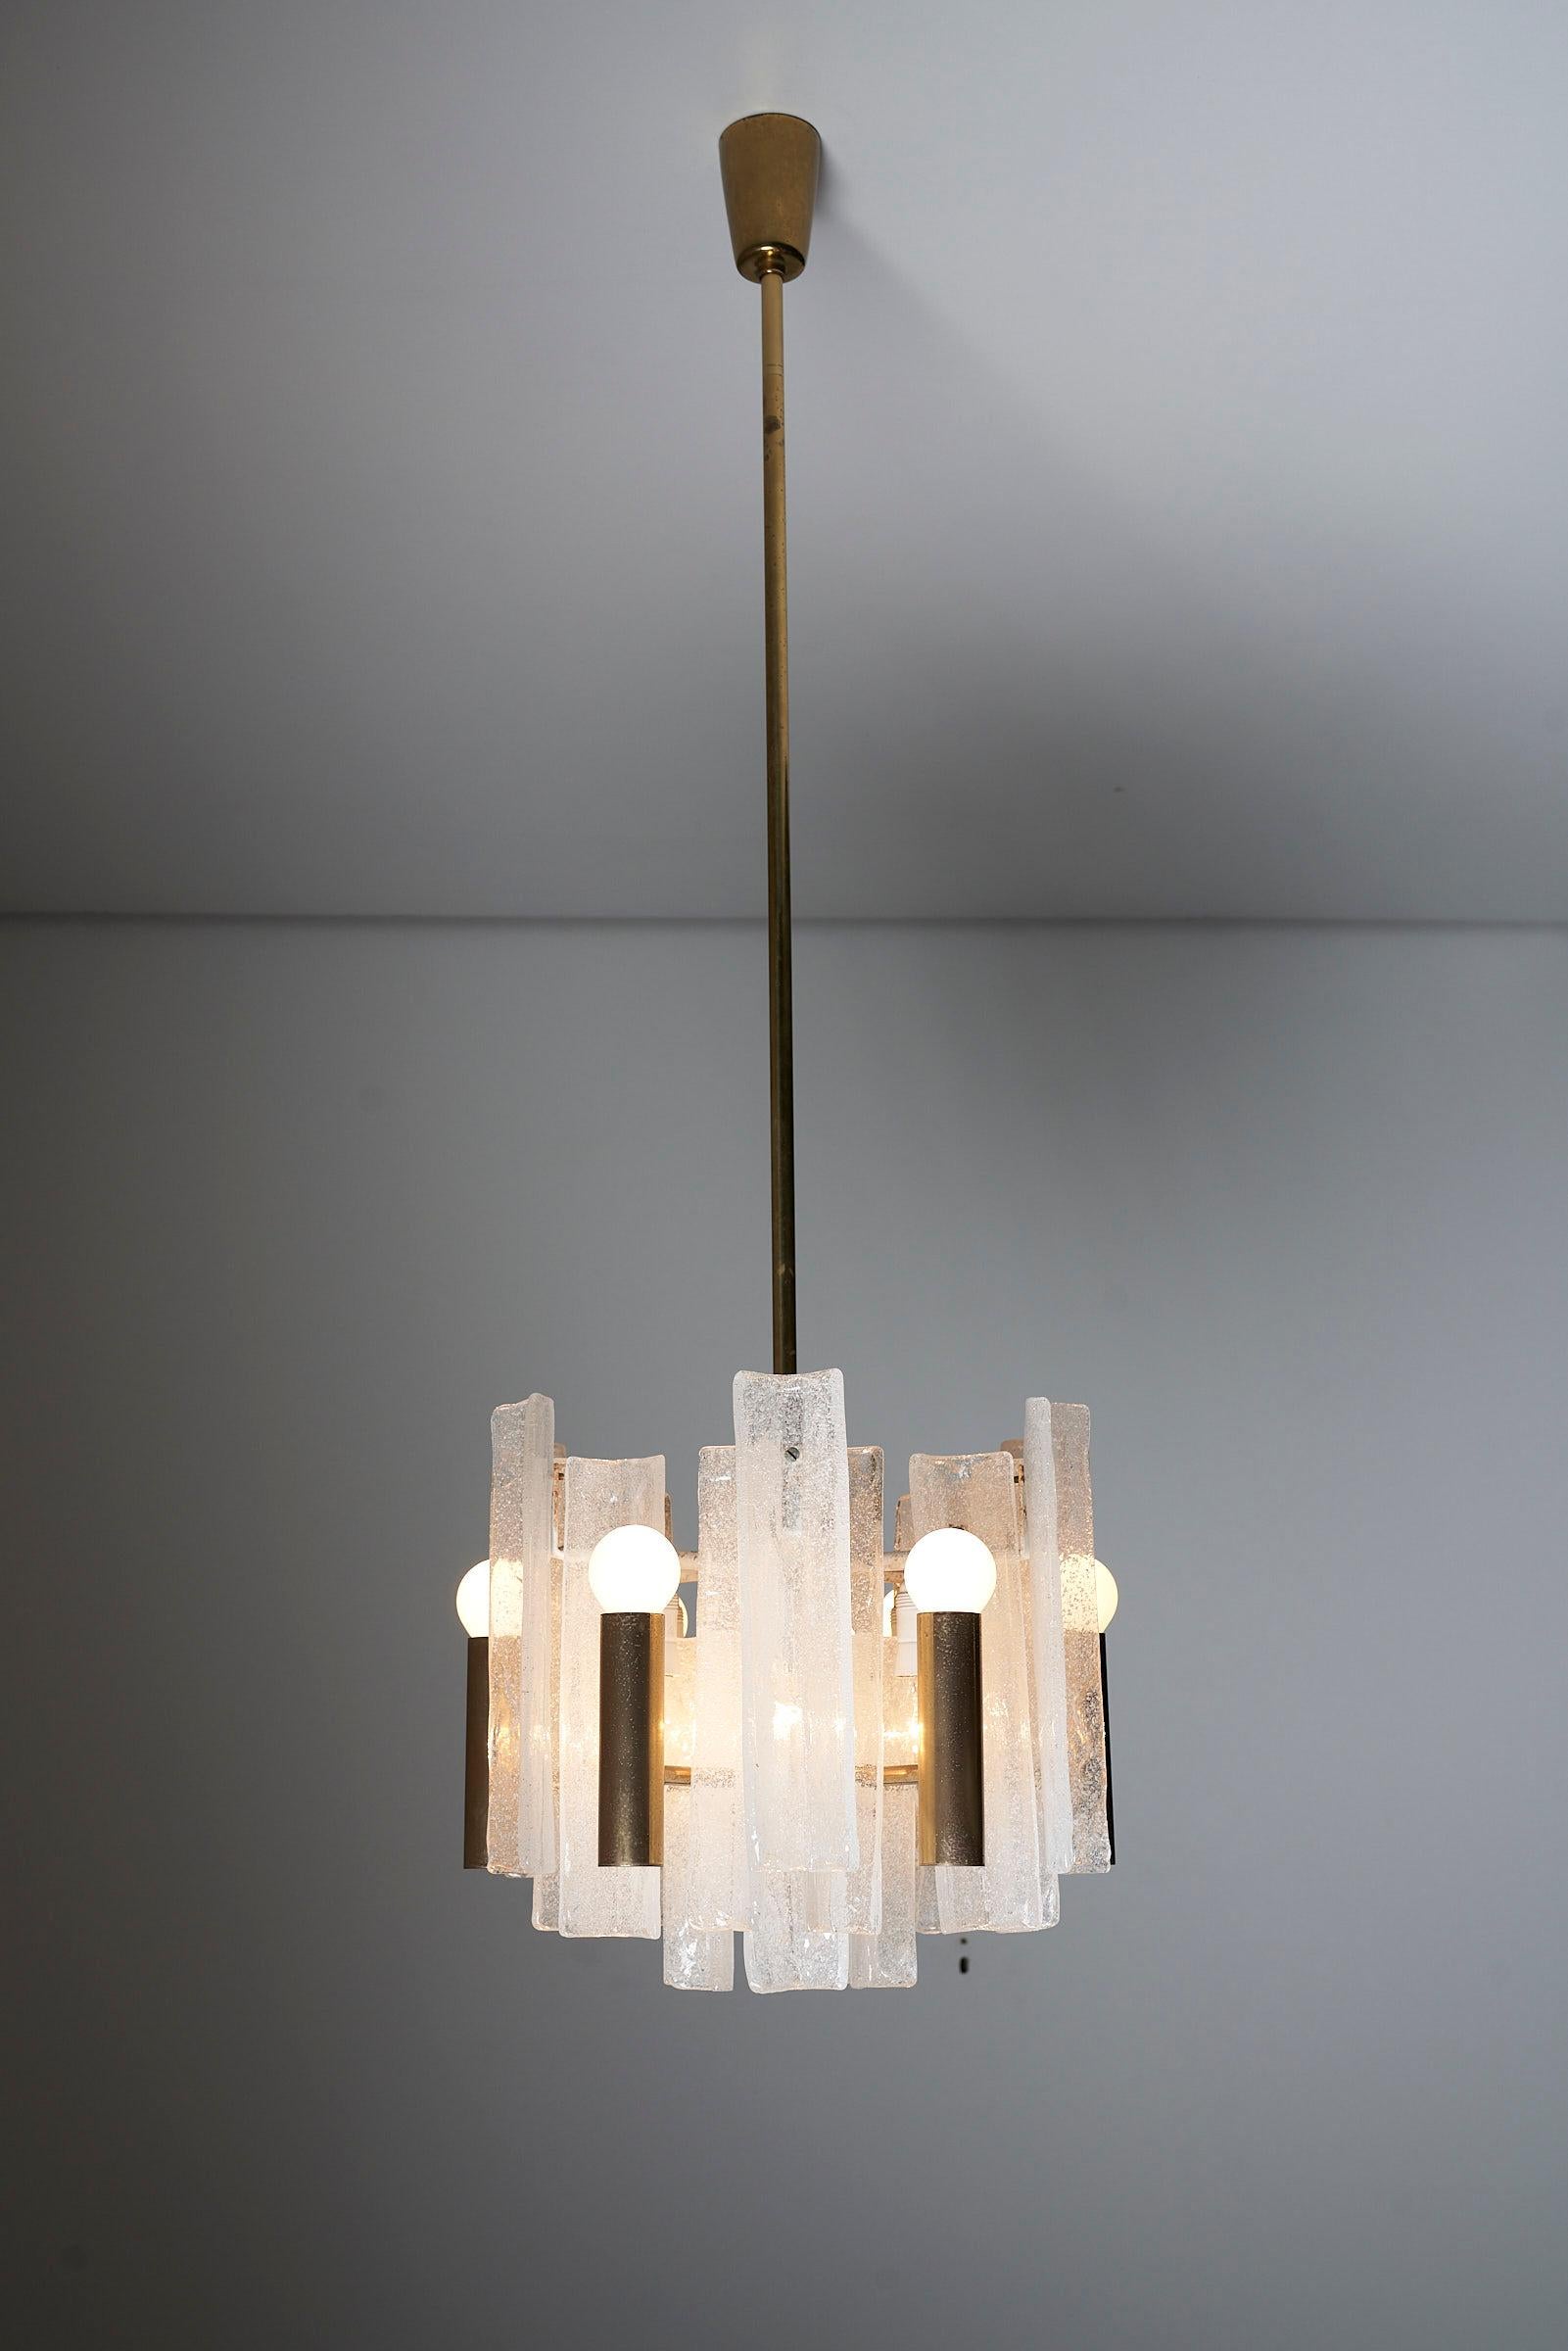 Introducing the Lipizza Chandelier by J.T. Kalmar, an Austrian lighting brand renowned for its craftsmanship and timeless designs. Founded in Vienna, J.T. Kalmar has dedicated itself to producing high-quality lighting solutions that are both